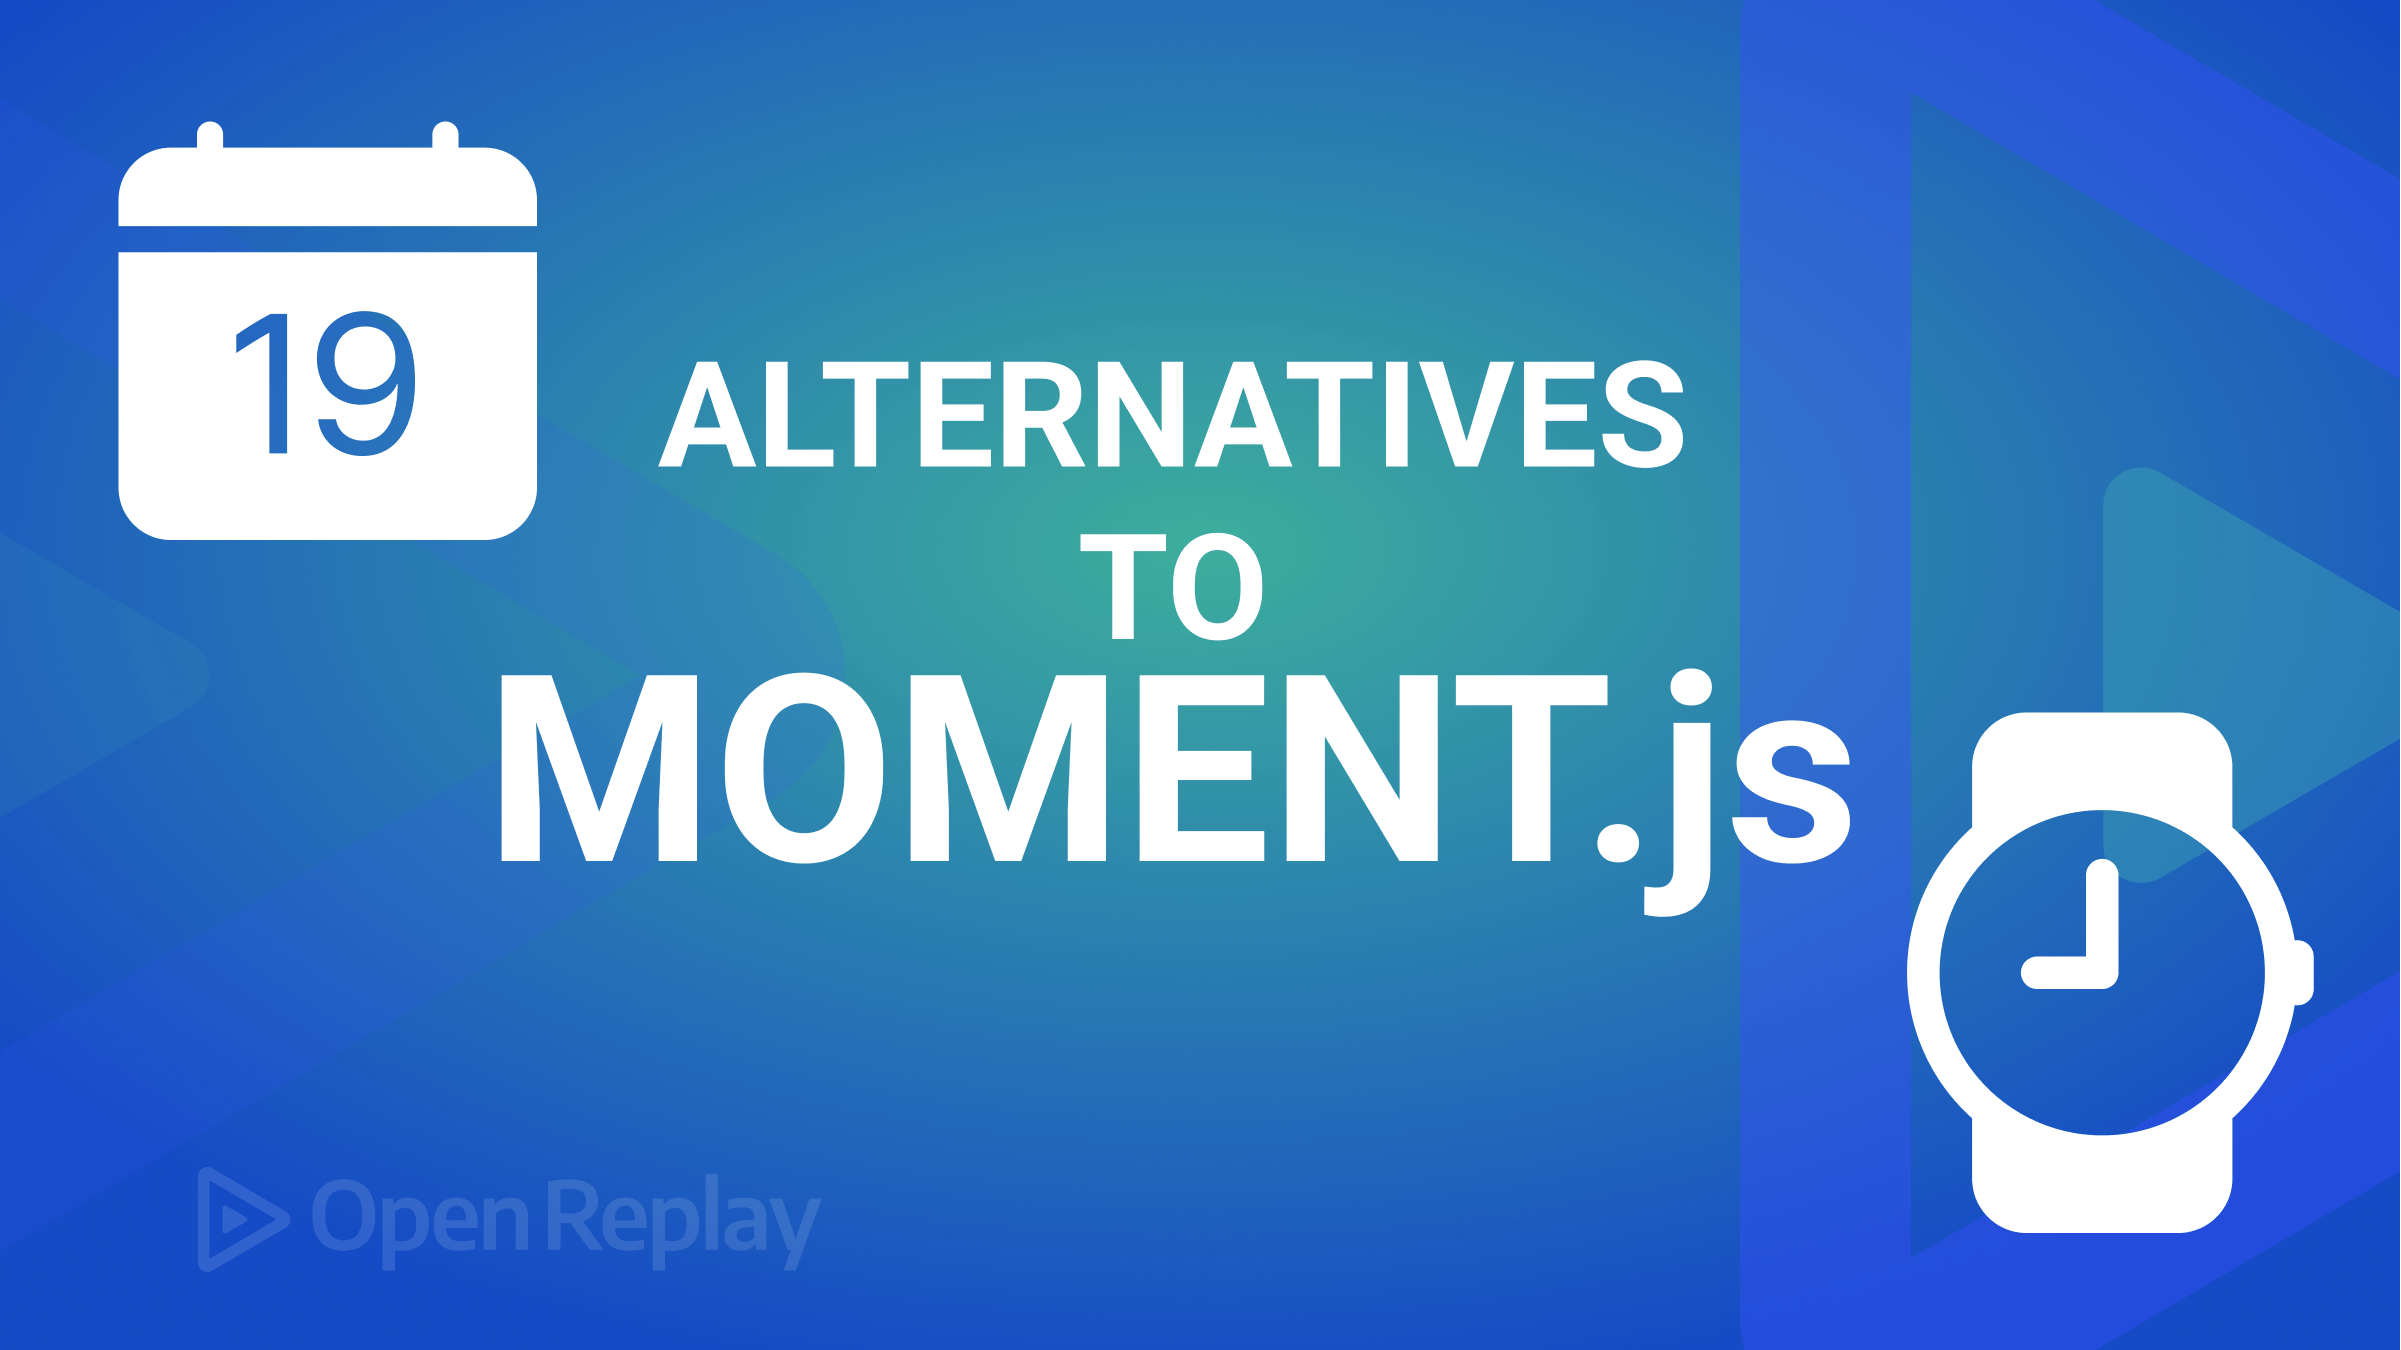 Dealing with Dates and Times: Alternatives to Moment.js